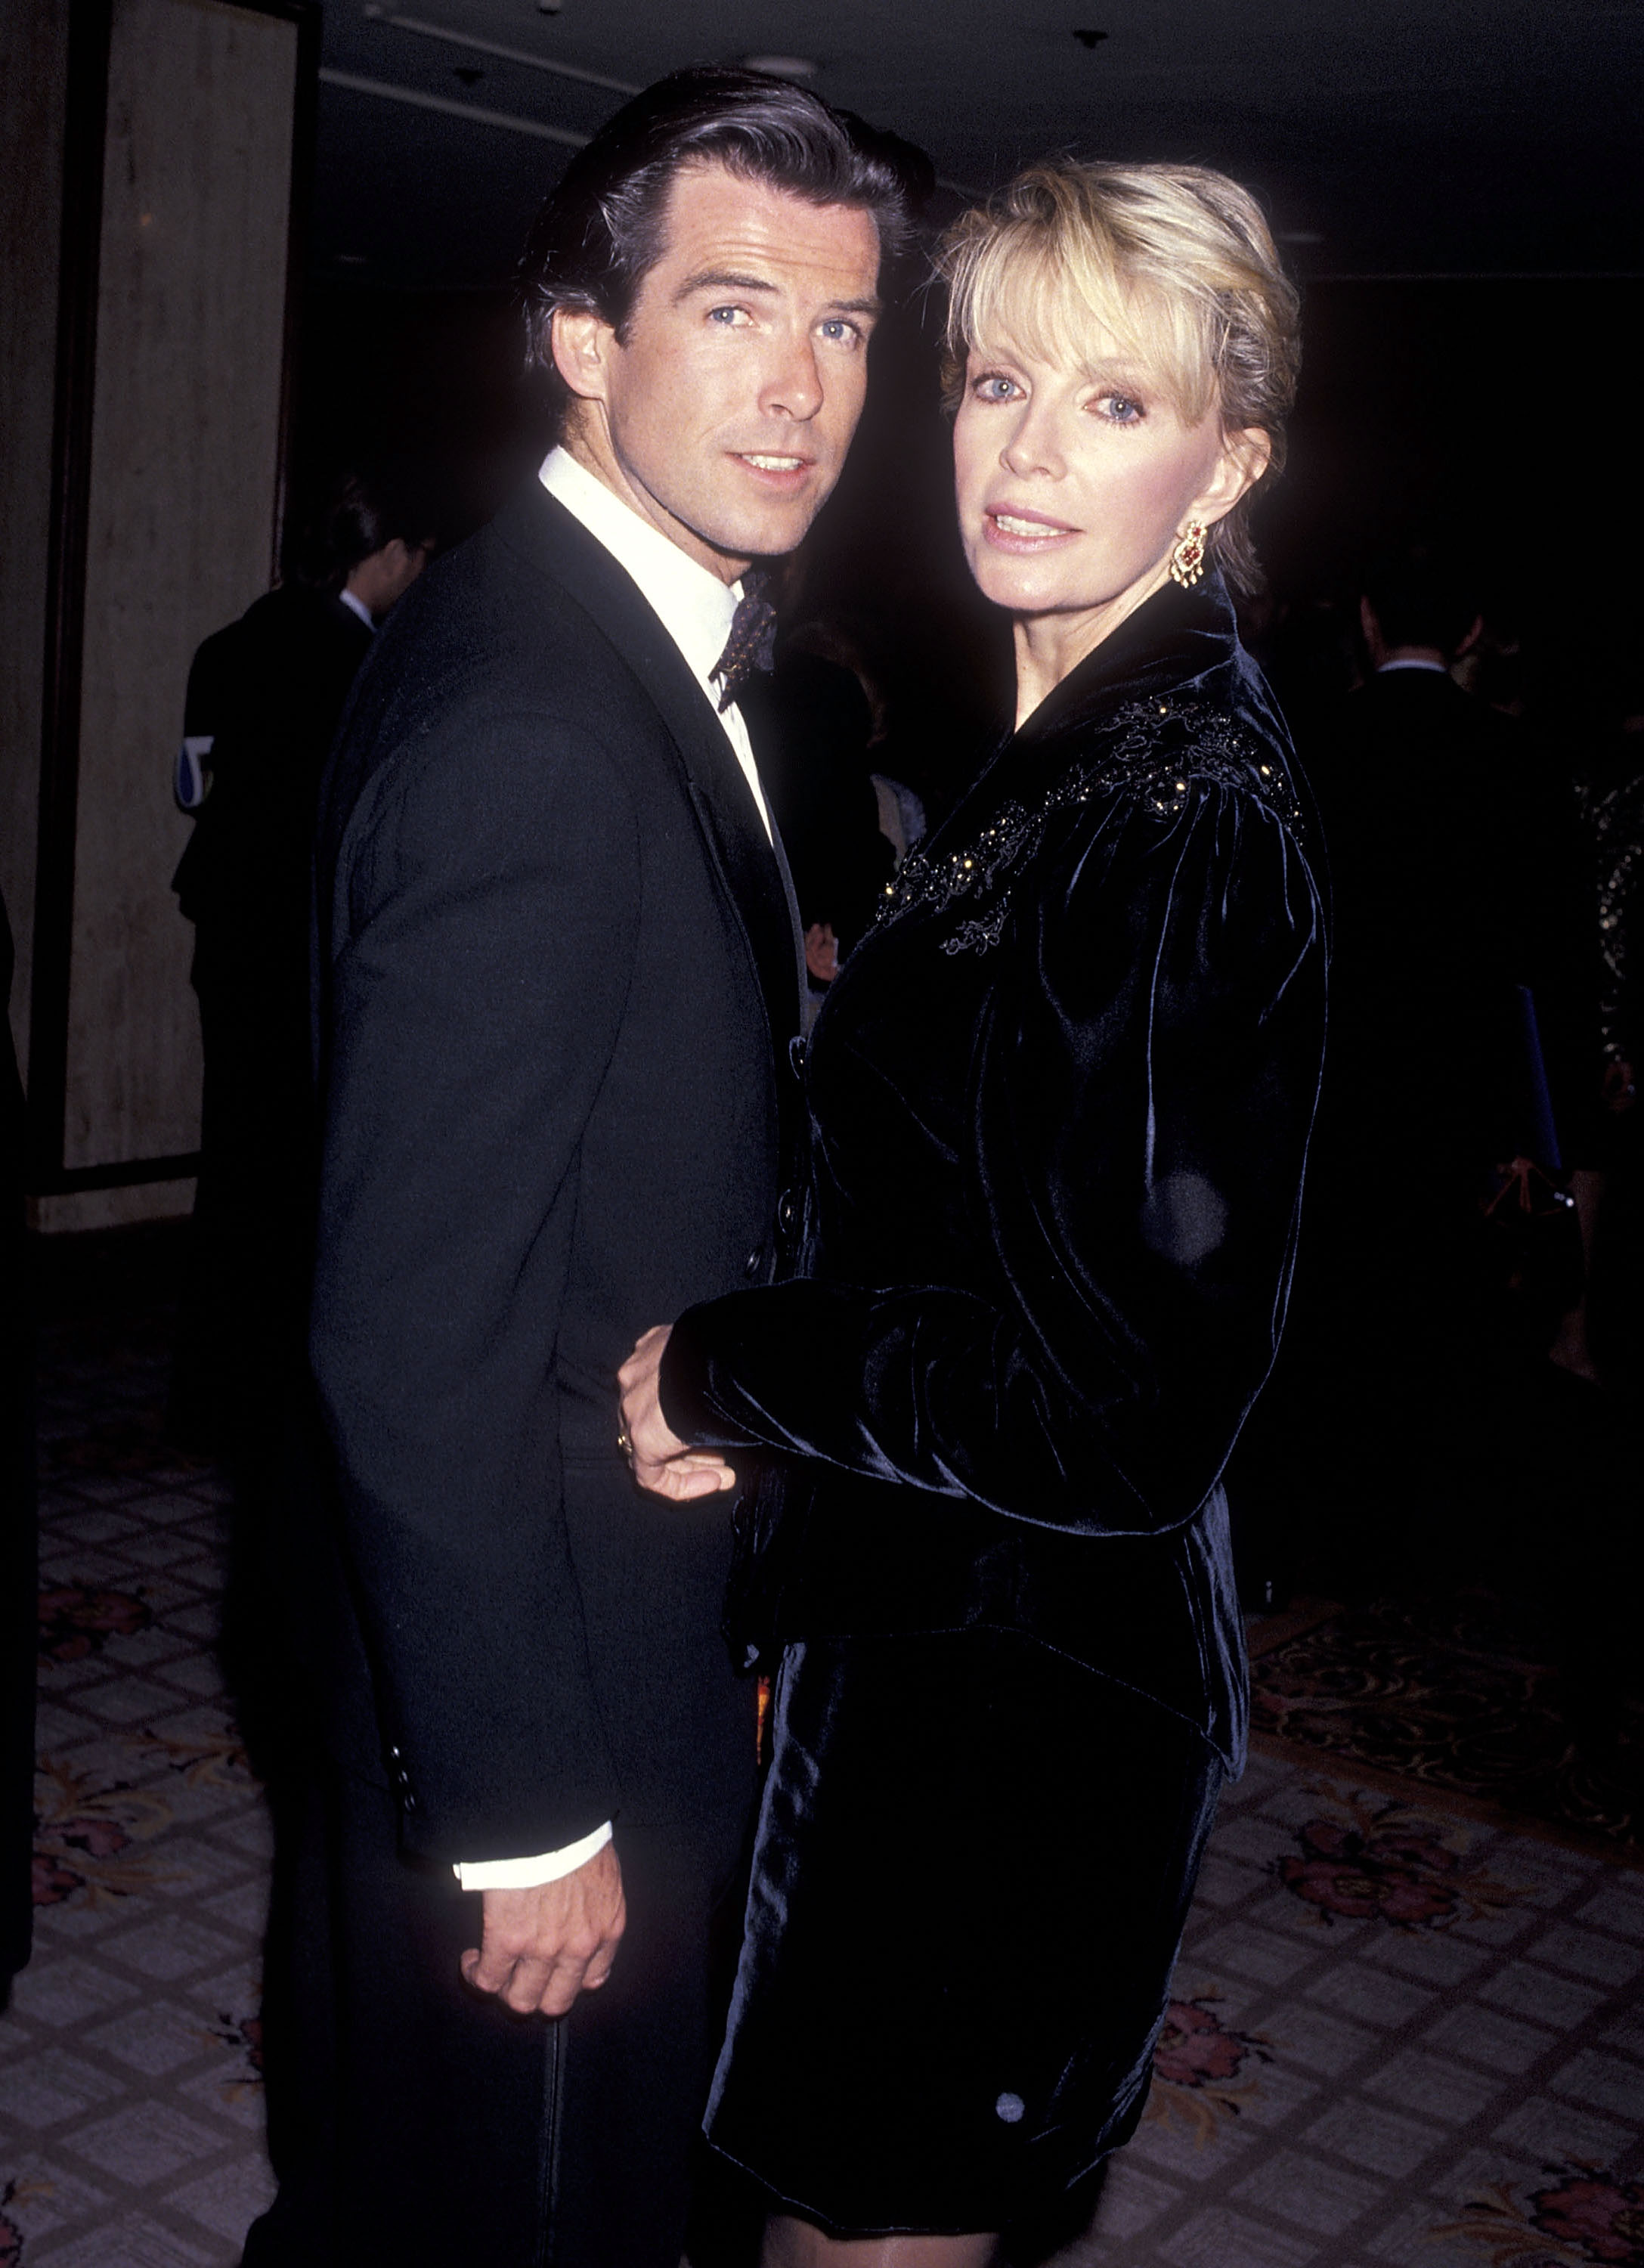 Pierce Brosnan and Cassandra Harris at the California Fashion Industry Friends of AIDS Project Los Angeles Fifth Annual Fashion Show at the Century Plaza Hotel on February 13, 1991 in Century City, California. | Source: Getty Images